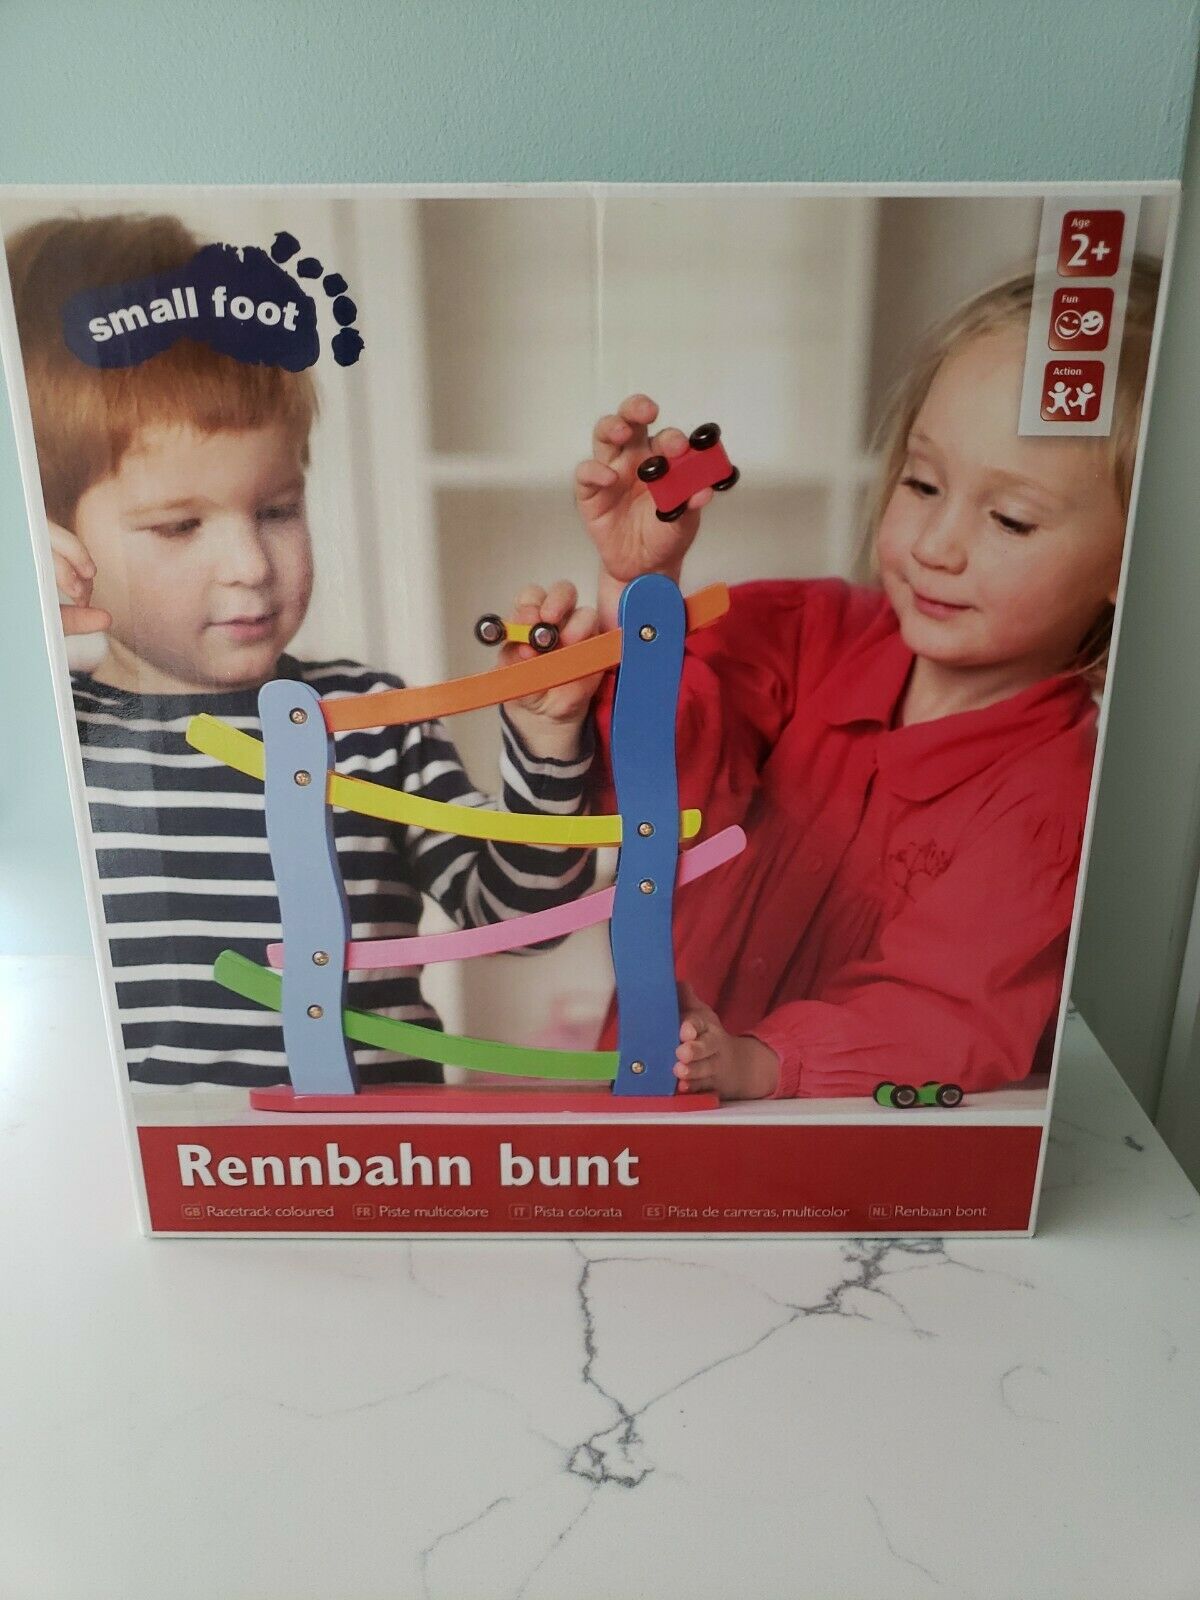 New Rennbahn Bunt Made In Germany Toy By Small Foot Colorful Racetrack  New